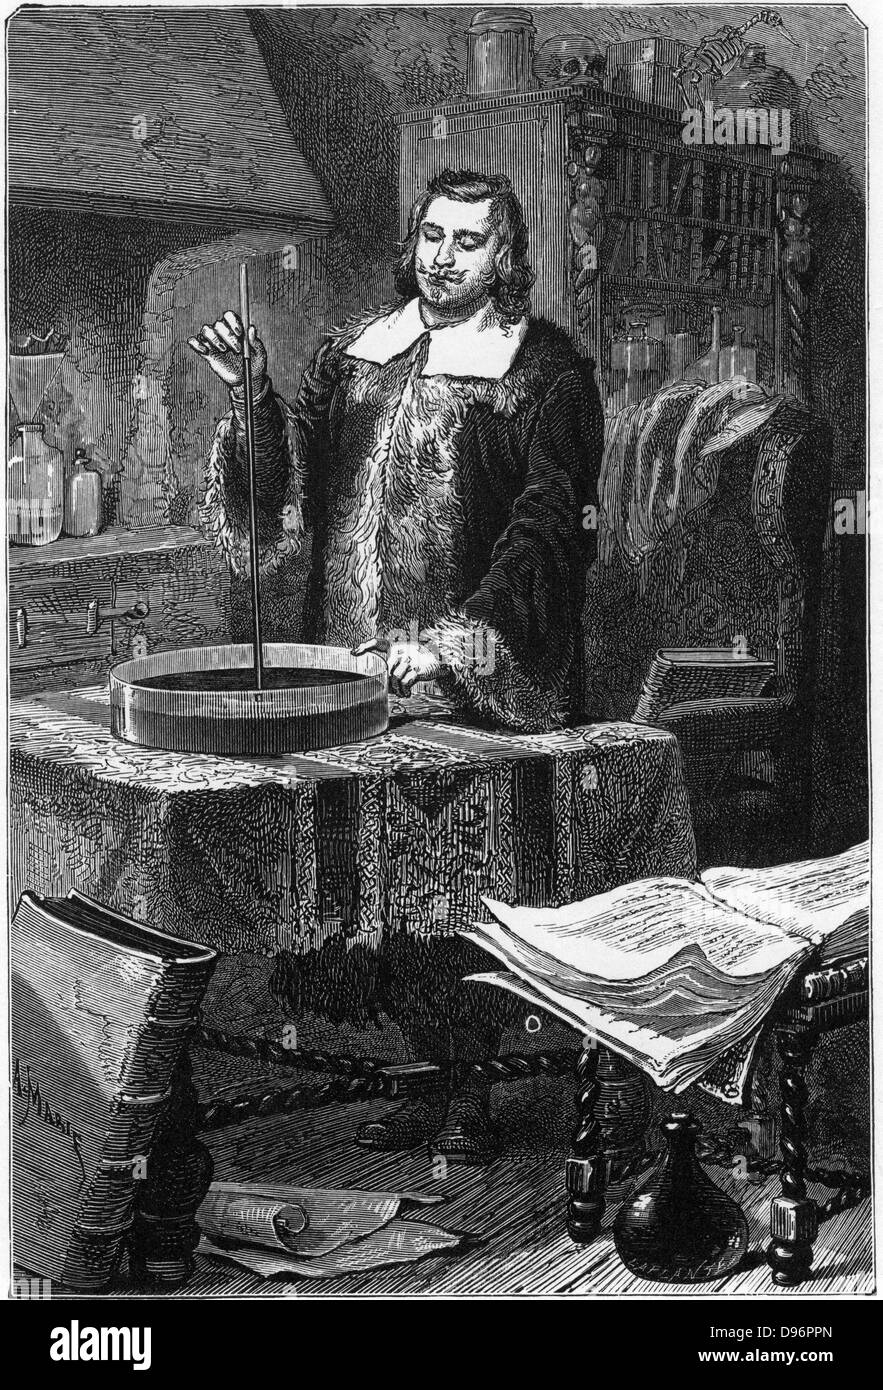 Evangelista Torricelli inventing the mercury barometer, 1643. Torricelli (1608-1647) demonstrated that liquid will rise in a tube unless the weight of the column of liquid is equal to the pressure of the air pressing on an equal section of the reservoir of liquid. The height of a column will depend on the density of the liquid used. Thus a column of water would be 9.75m (32 feet), while that of mercury which is approximately 13.5 times denser, would be .736m (29 ins). From 'The Atmosphere', by Camille Flammarion. (London 1873). Stock Photo